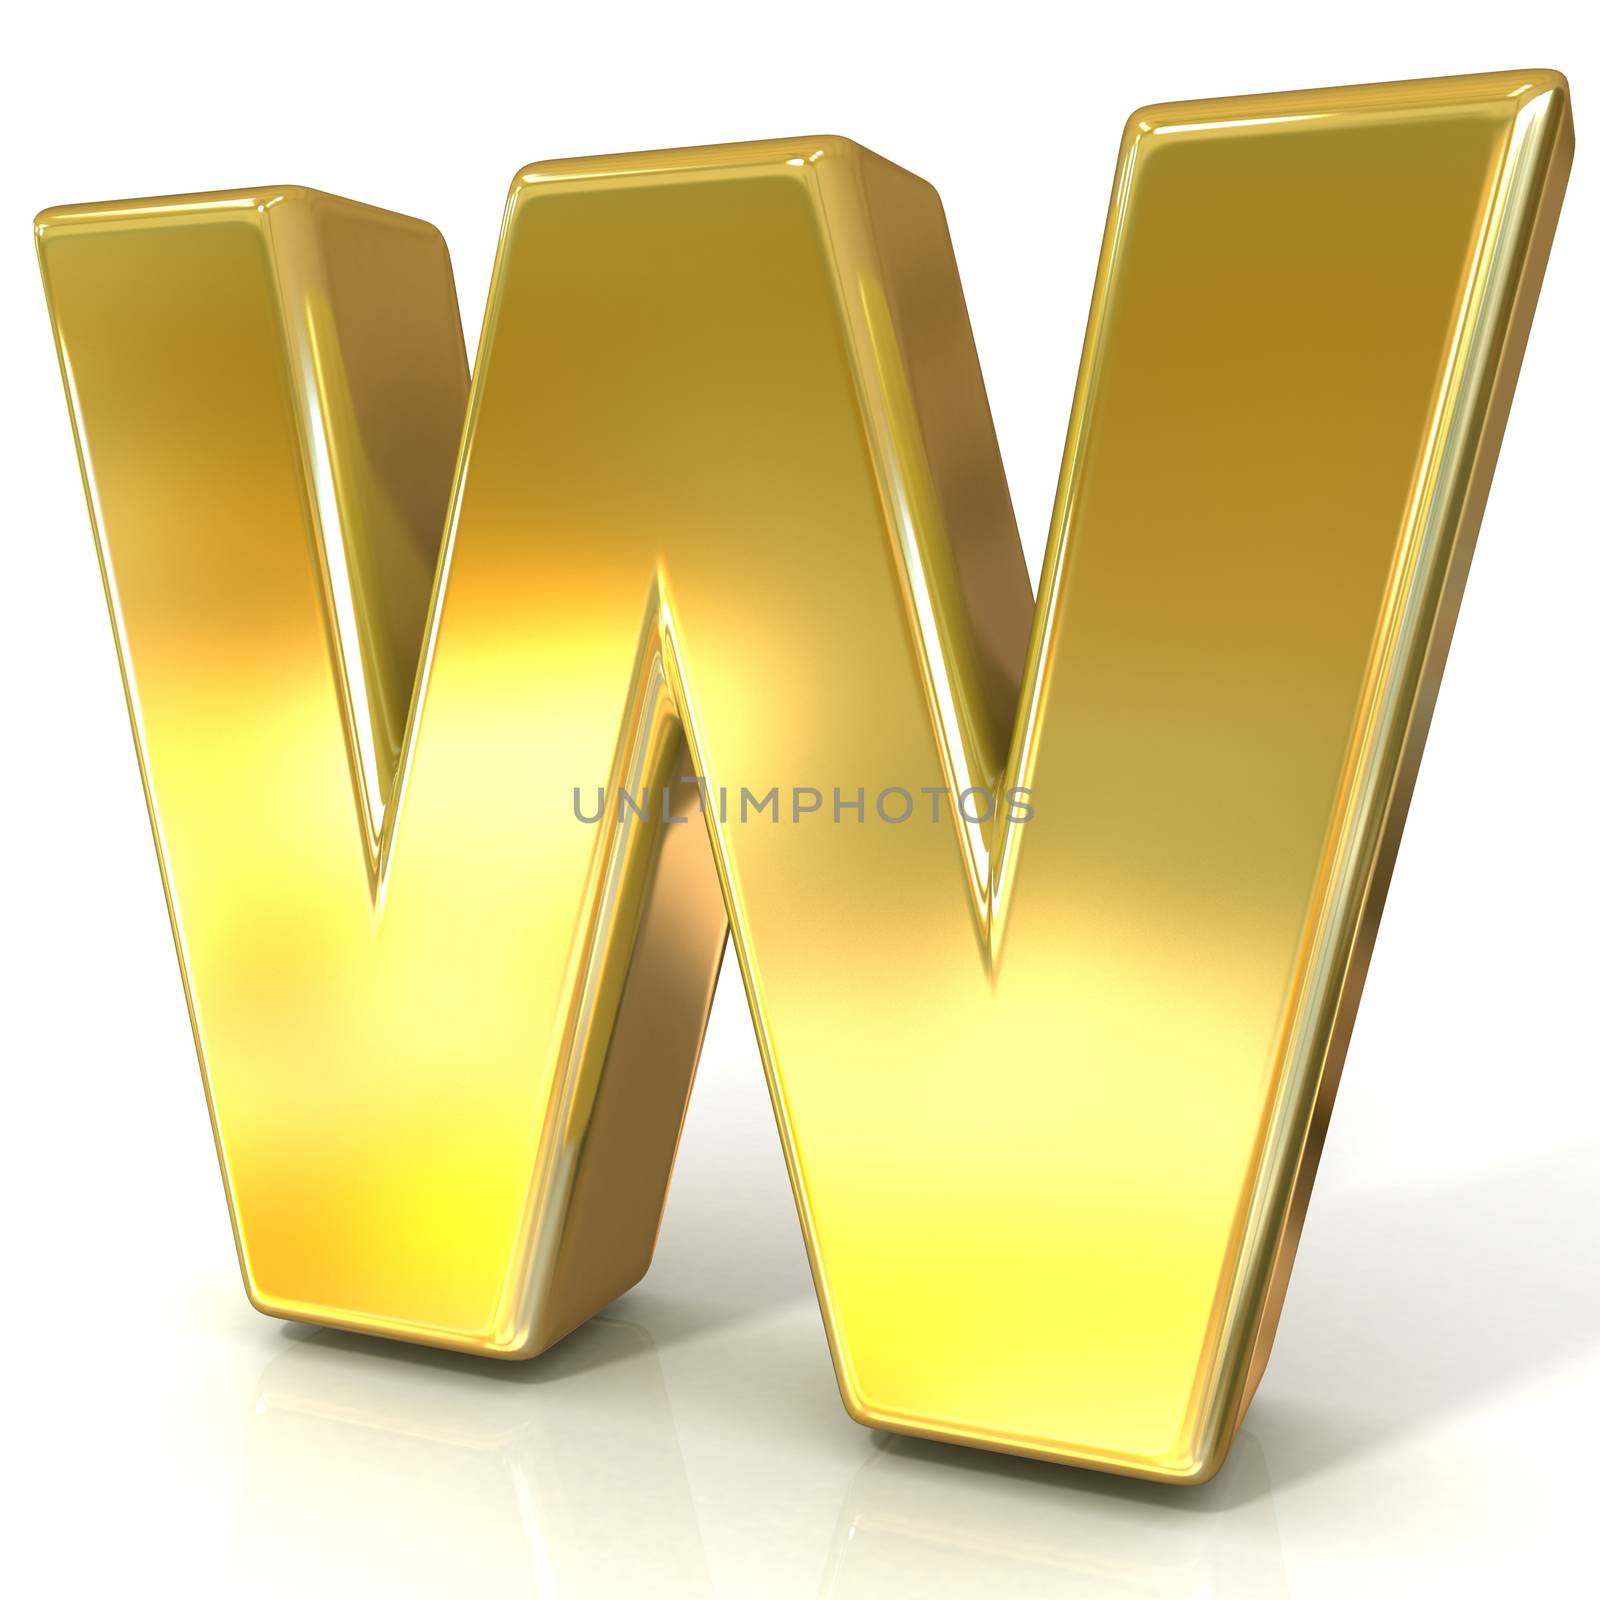 Golden font collection letter - W. 3D render illustration, isolated on white background.